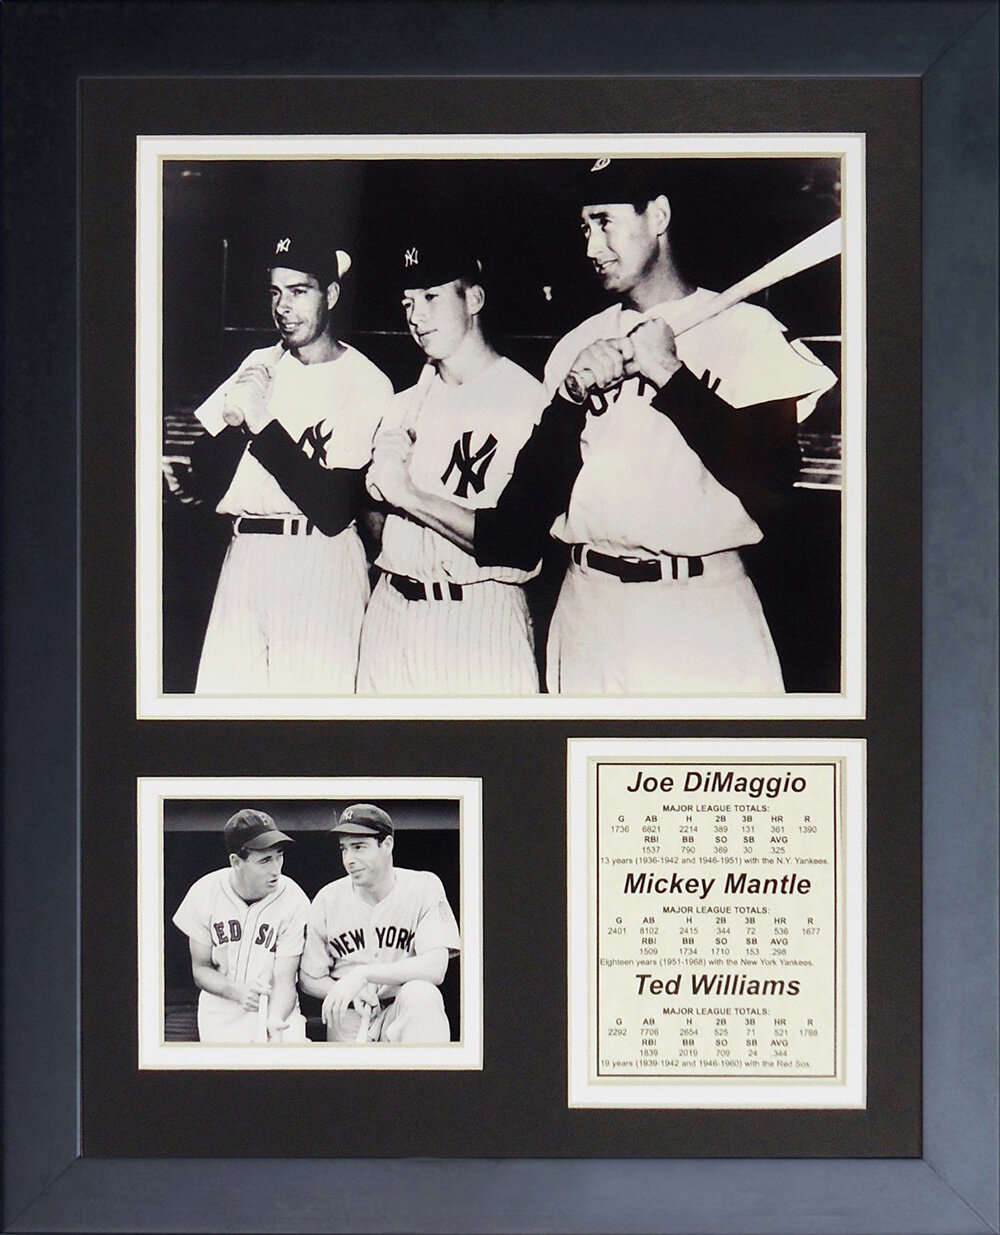 Mickey Mantle, DiMaggio & Ted Williams Signed Photo for Sale in